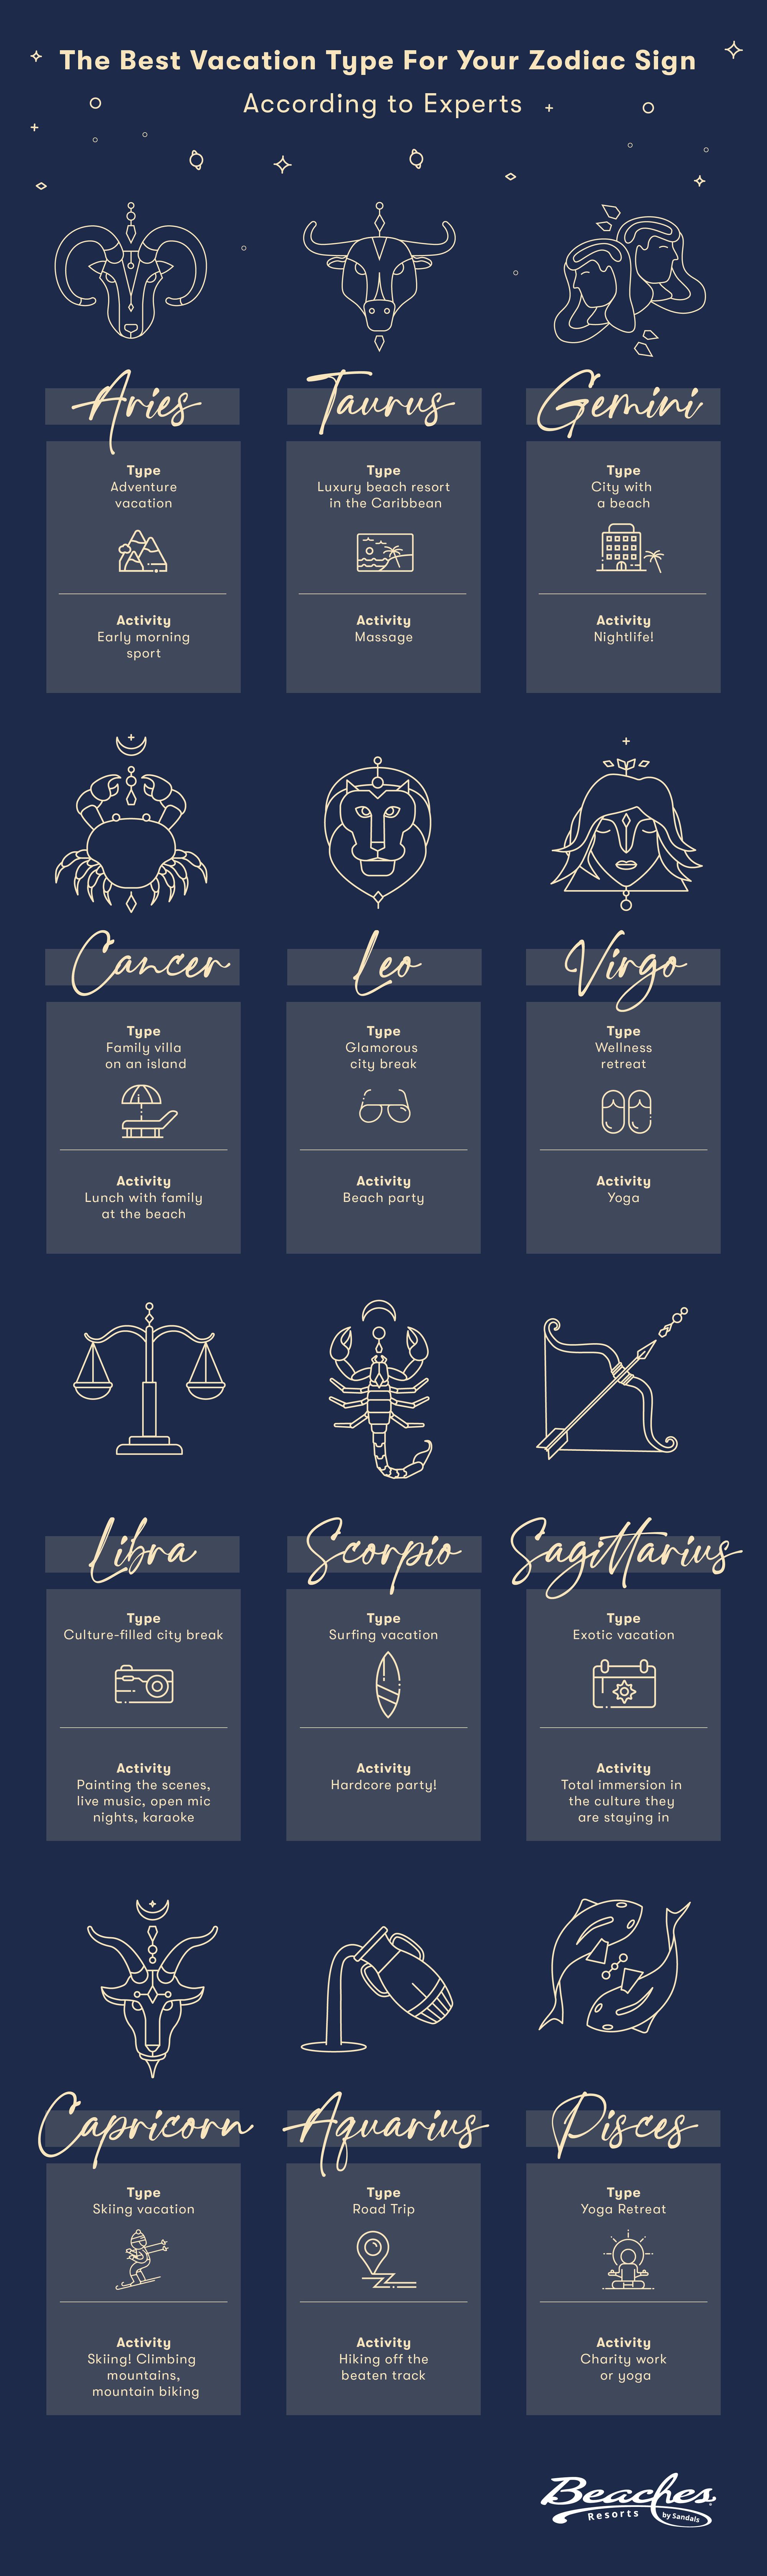 How To Choose The Right Zodiac Sign